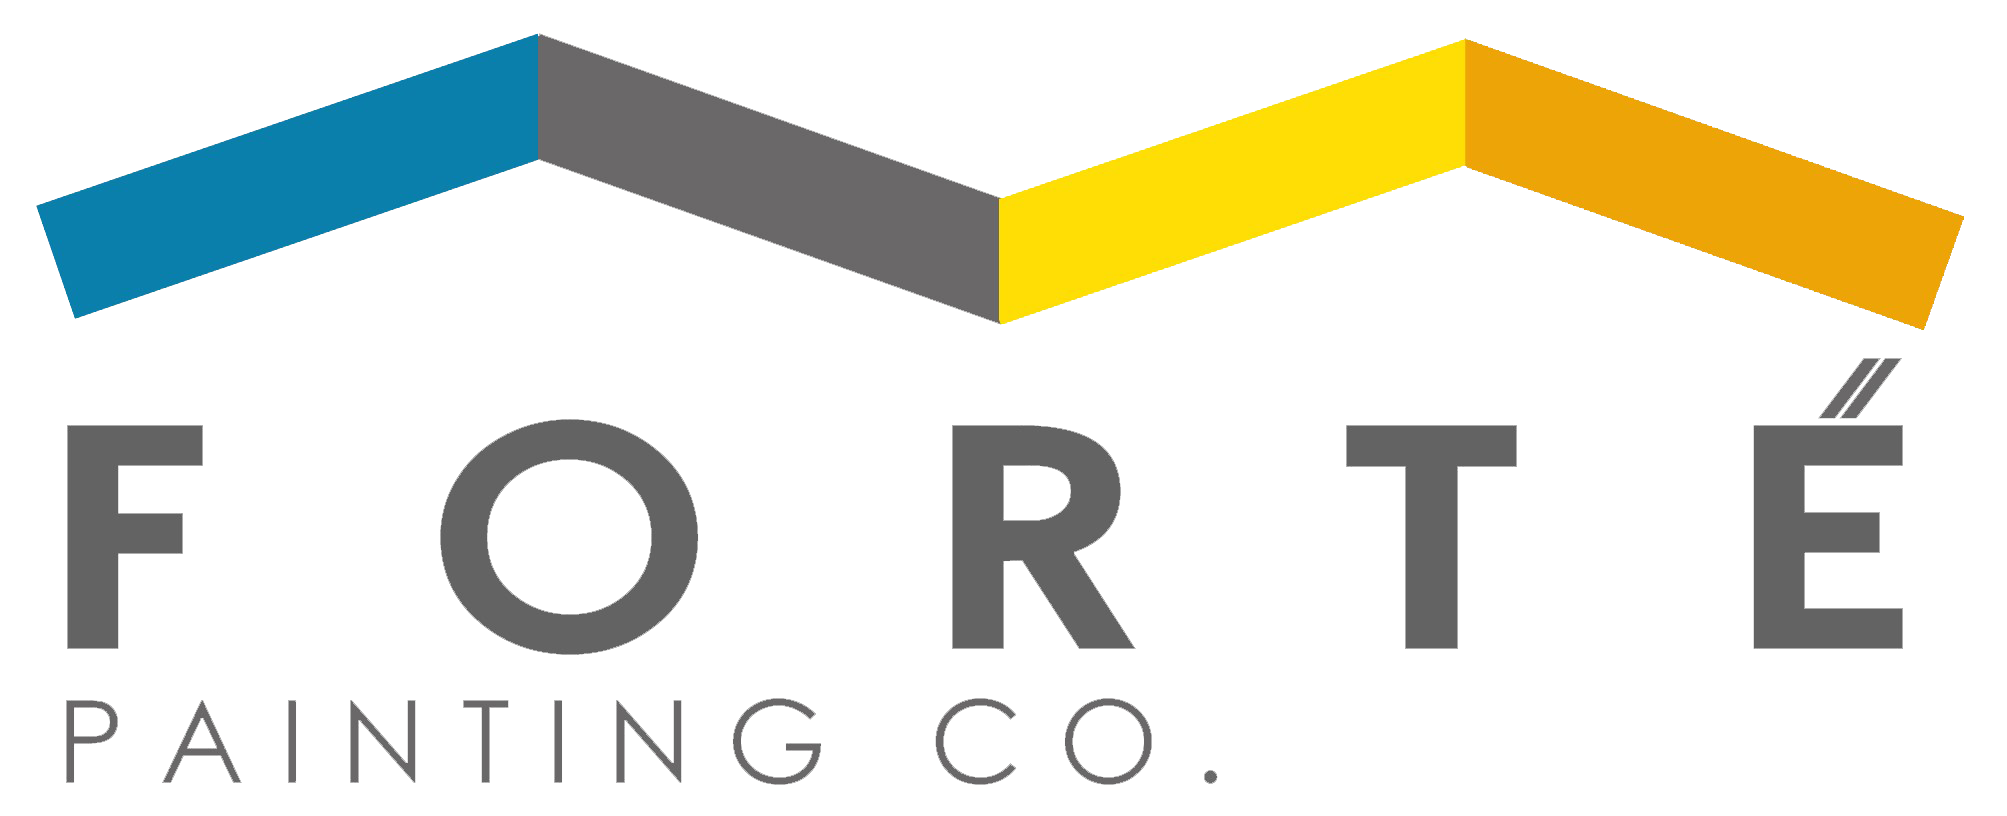 FORTE PAINTING COMPANY